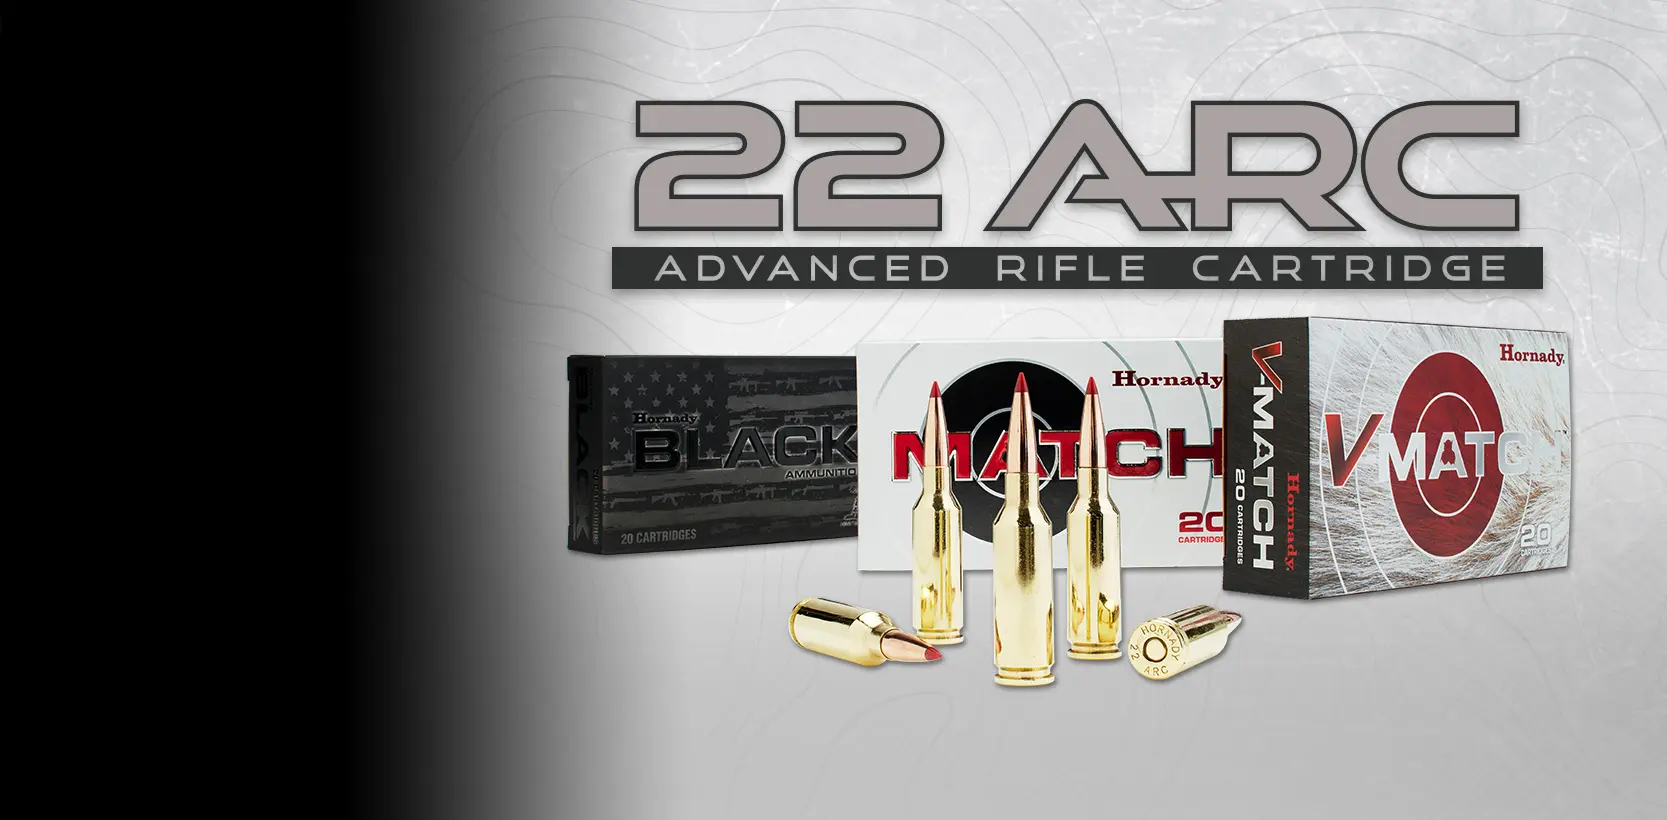 Slide number 3 PERFECT FIT,FLAWLESSFUNCTIONALITY
The 22 ARC (Advanced Rifle Cartridge) brings exceptional power and performance, elegantly packed into a compact cartridge that fits into your AR-15 but is equally at home in a bolt action.Find Out More